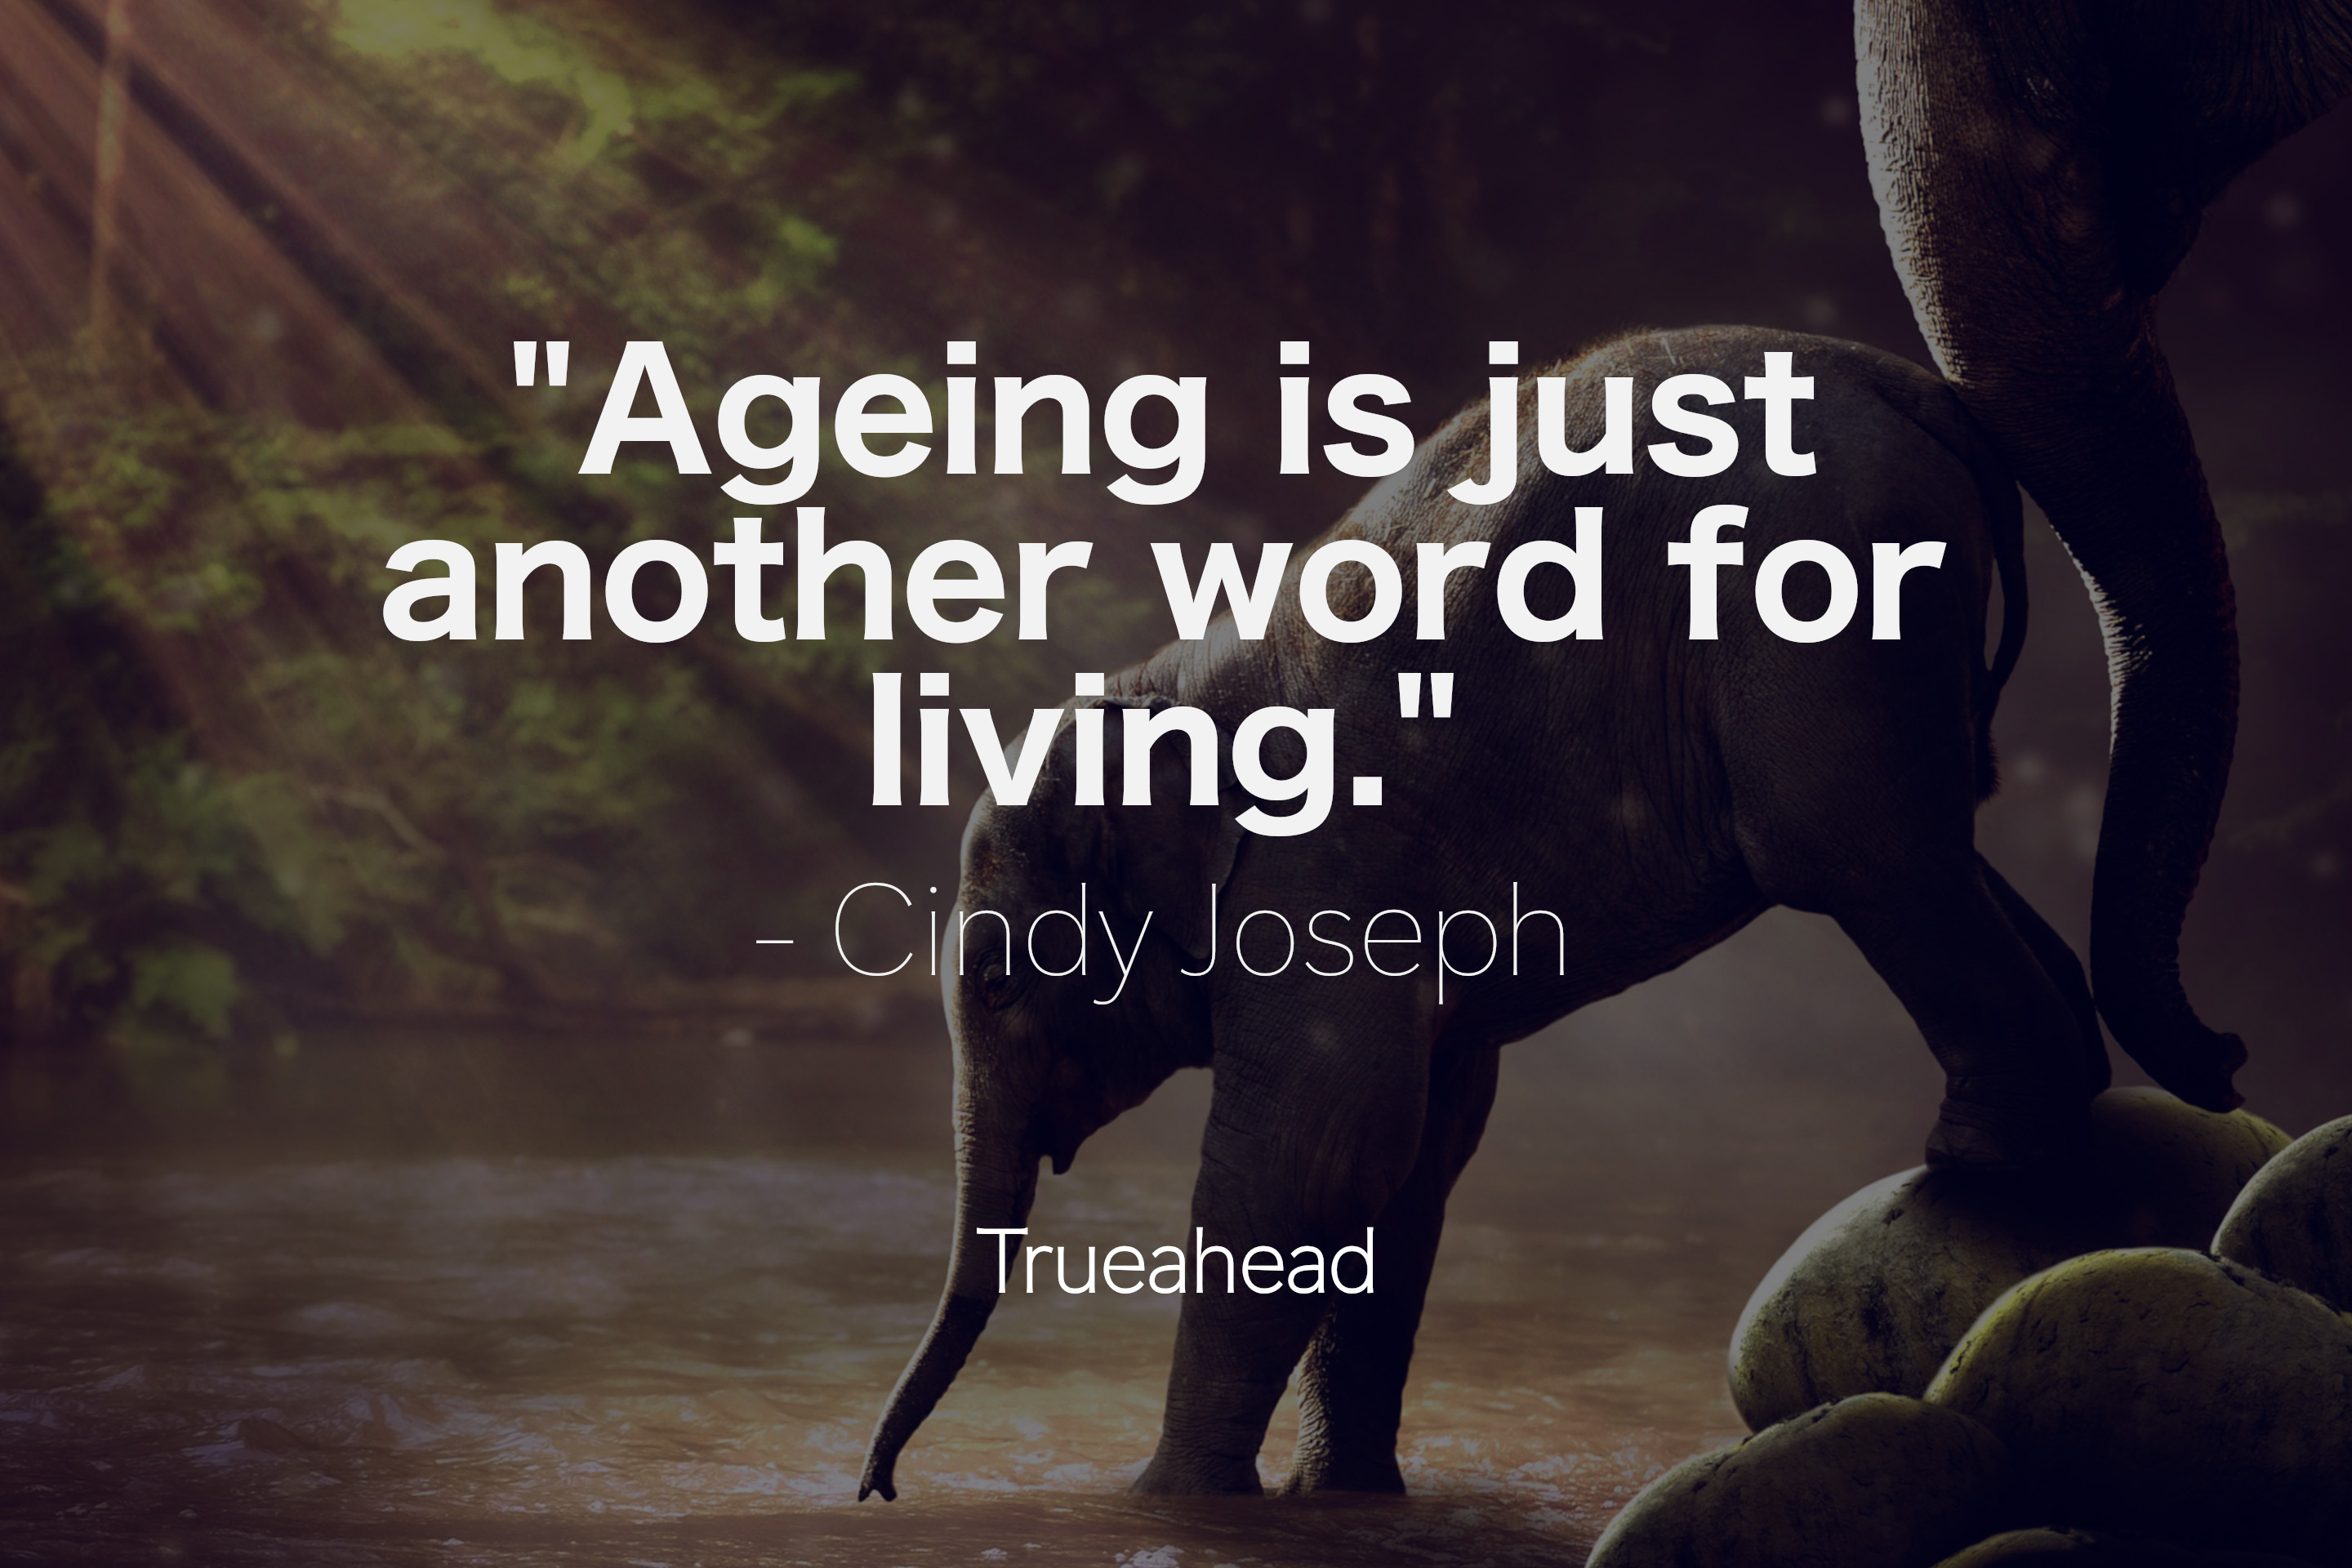 About Aging by Cindy Joseph - Quotes